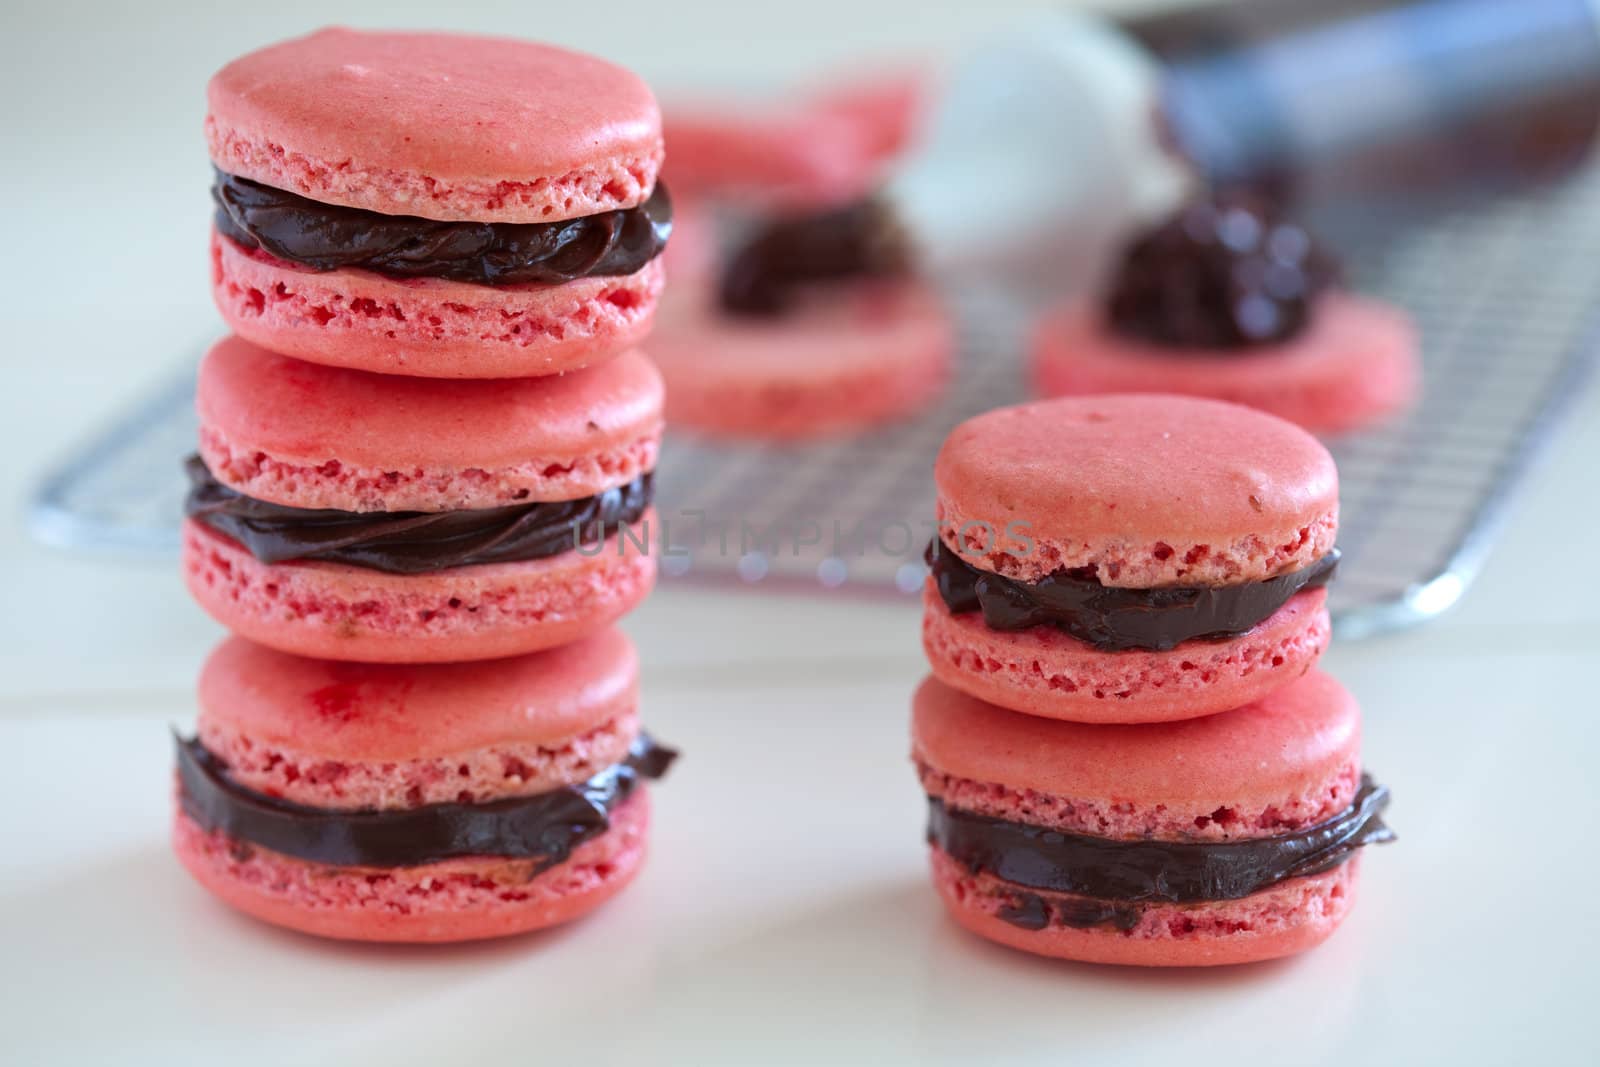 Delicious chocolate filled macarons stacked together